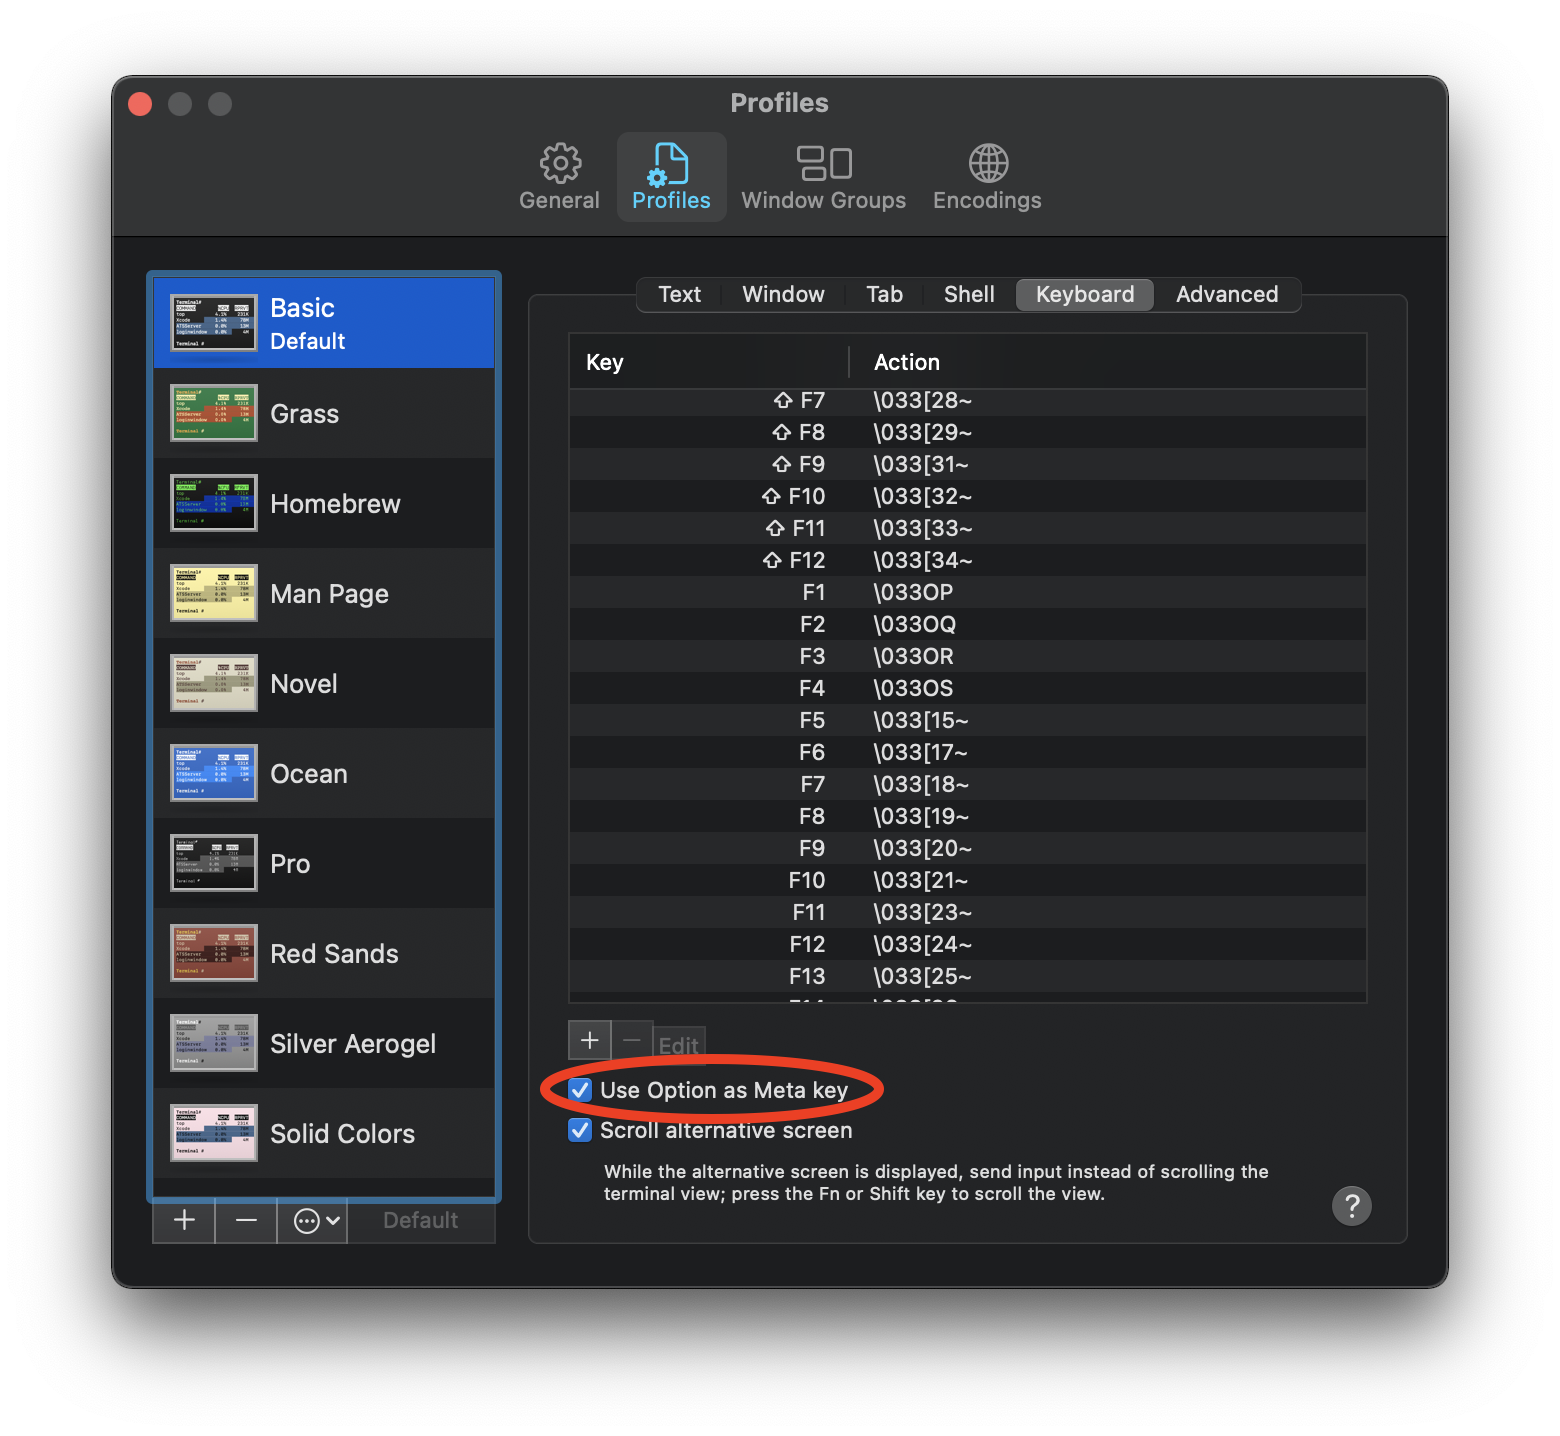 instal the new version for mac NCH PicoPDF Plus 4.32